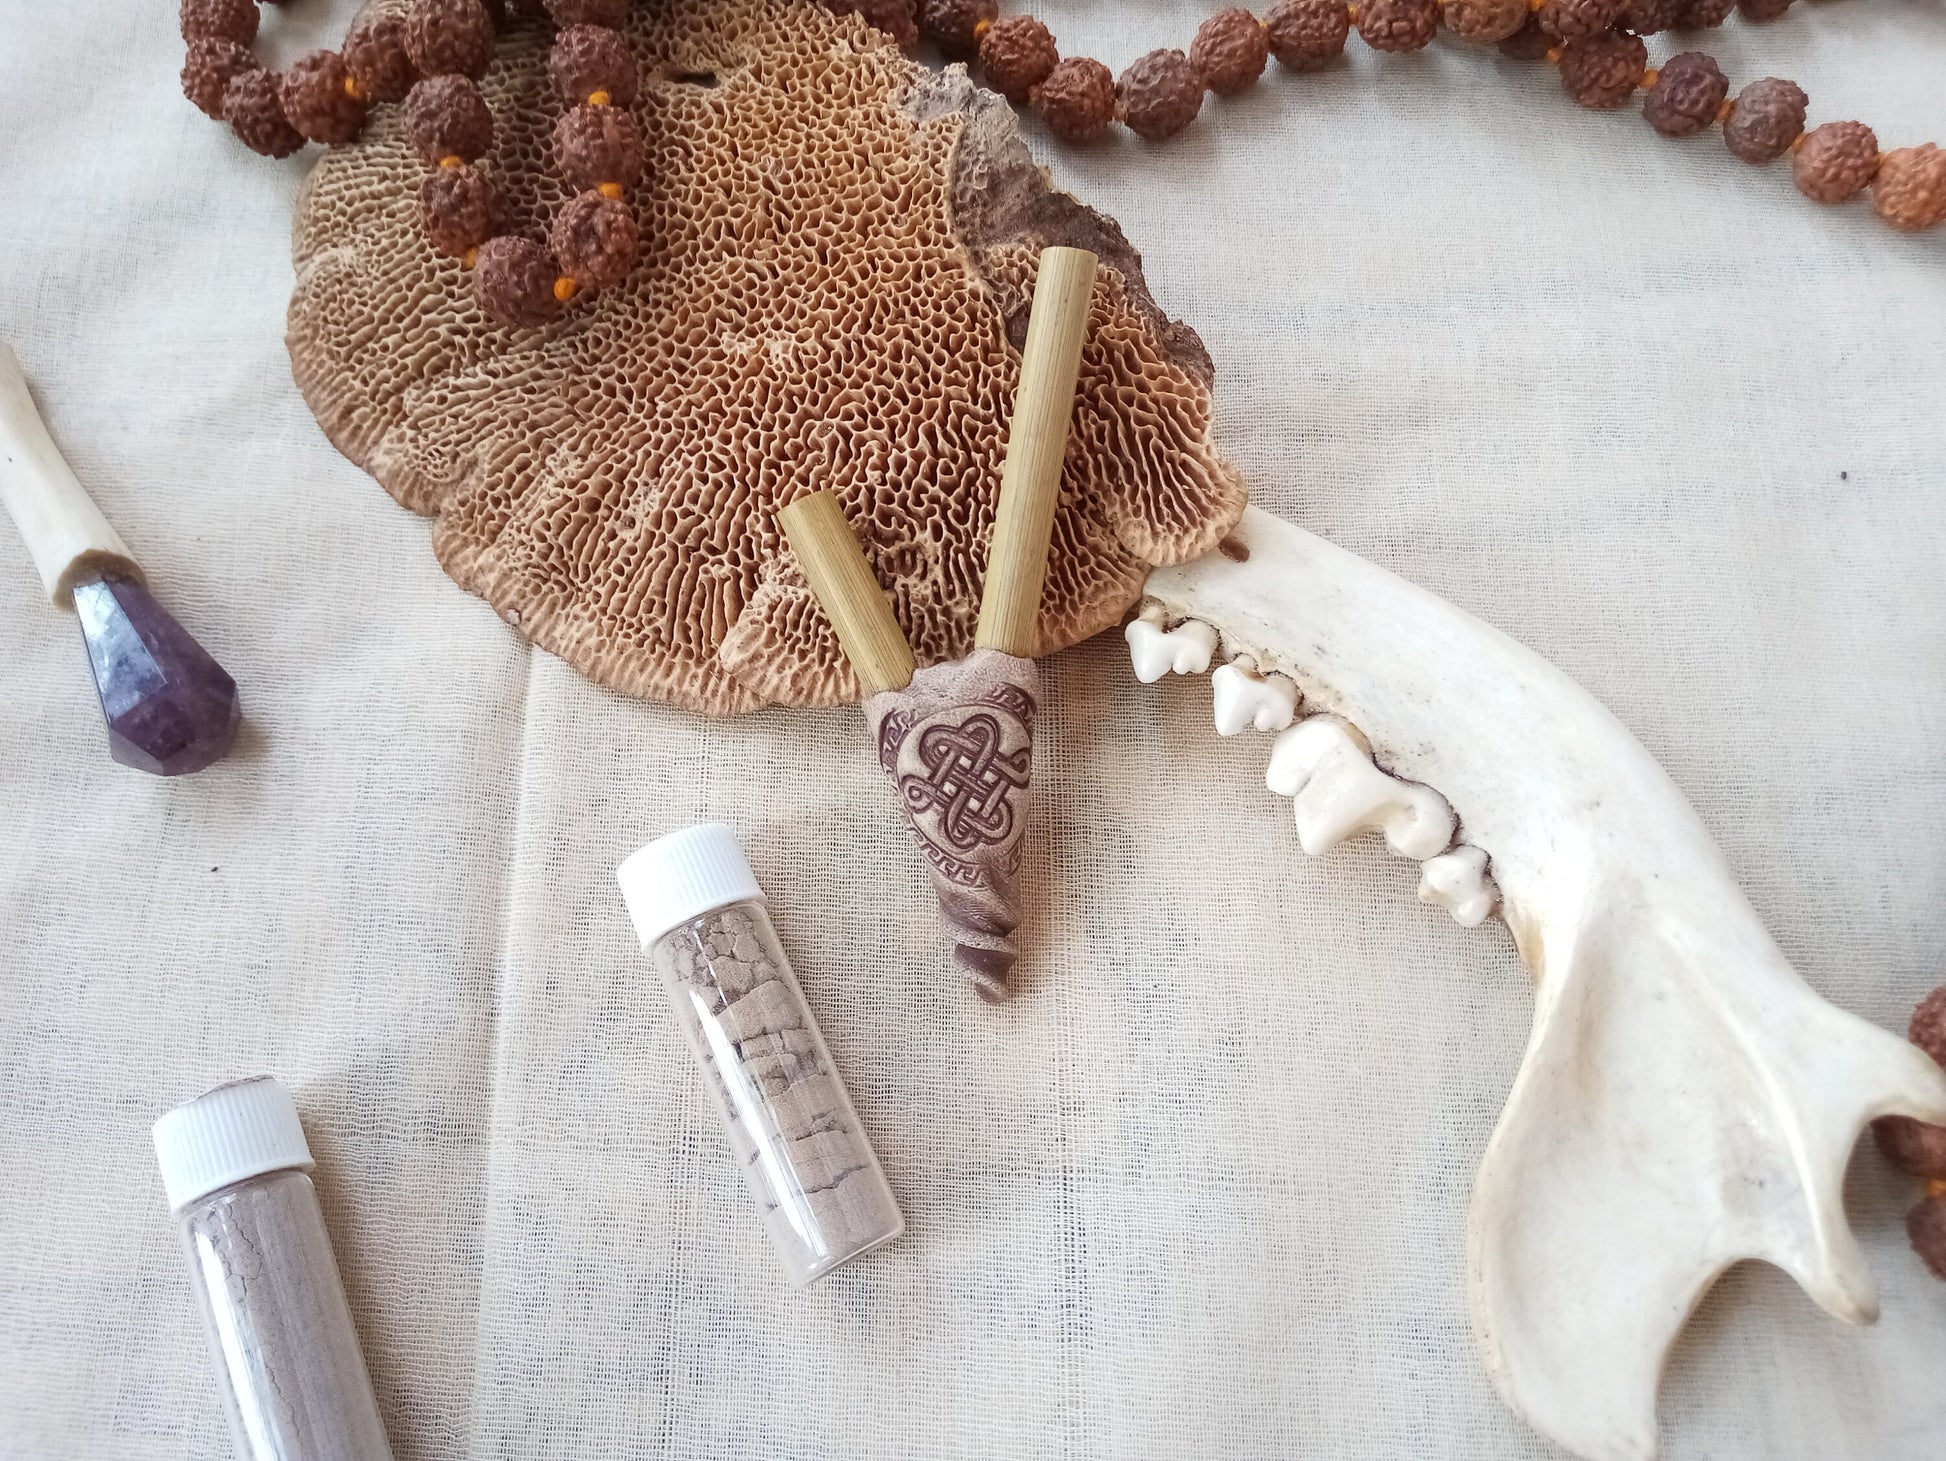 Kuripe self applicator - For Rapè and traditionally used in Ayahuasca or Kambo ceremonies - handmade bamboo pipe with agate crystal